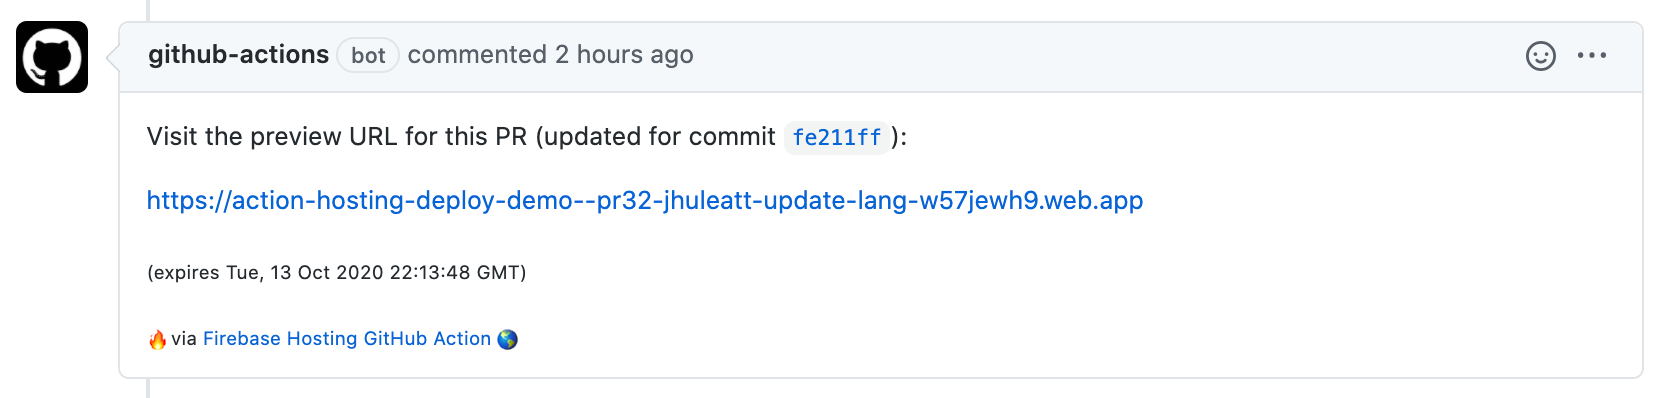 image of GitHub Action PR comment with preview URL